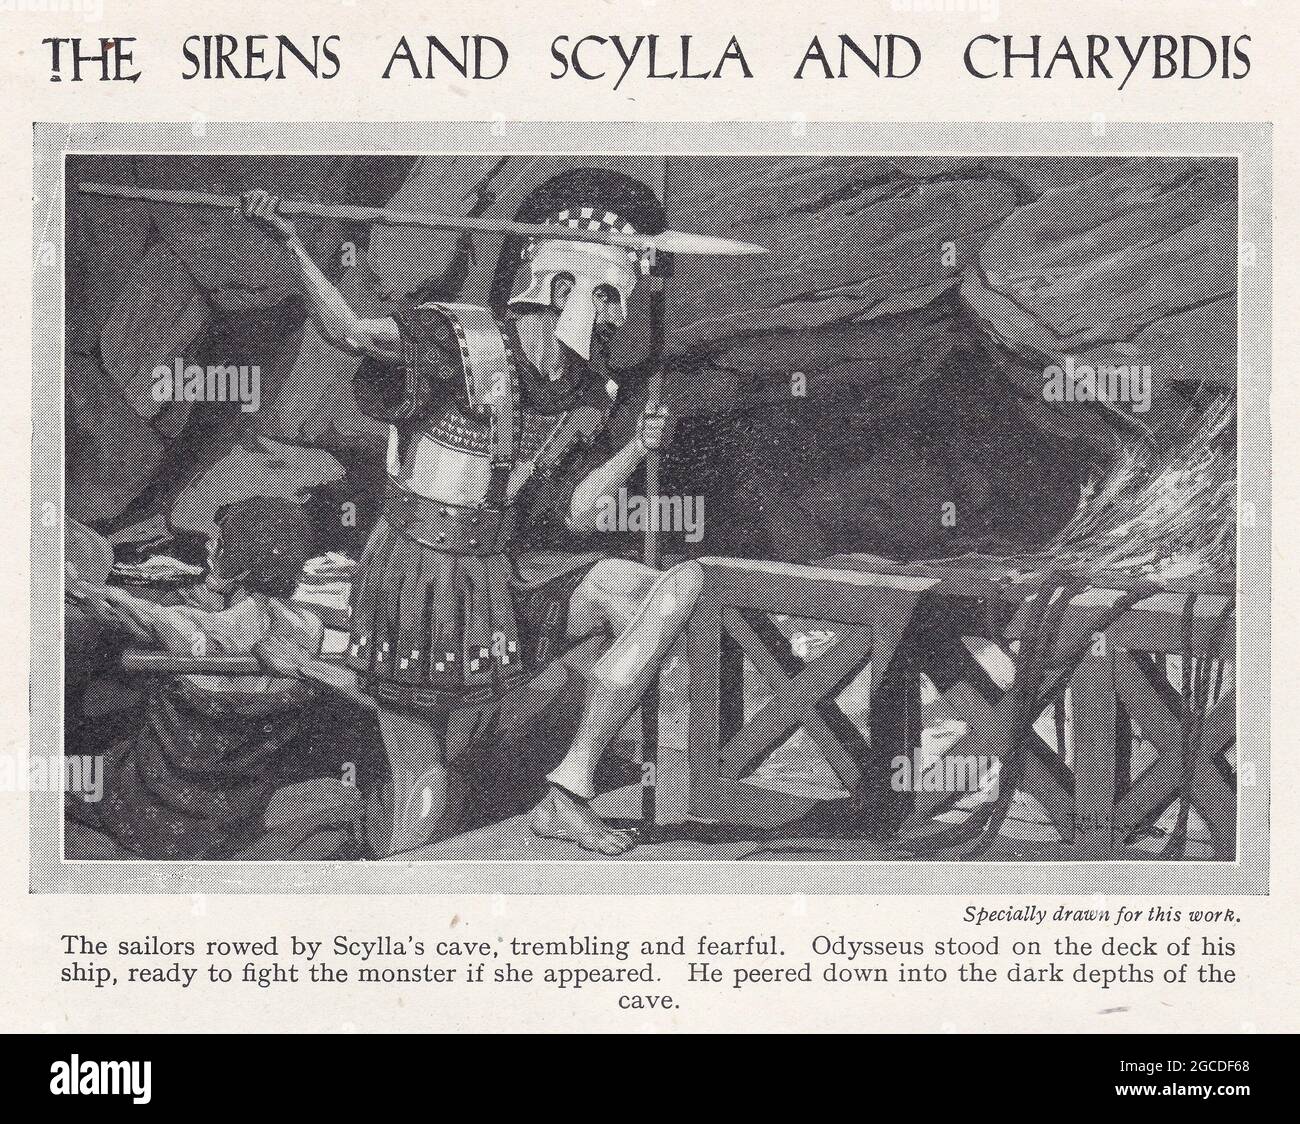 Vintage illustrations of The Sirens and Scylla and Charybdis. Stock Photo